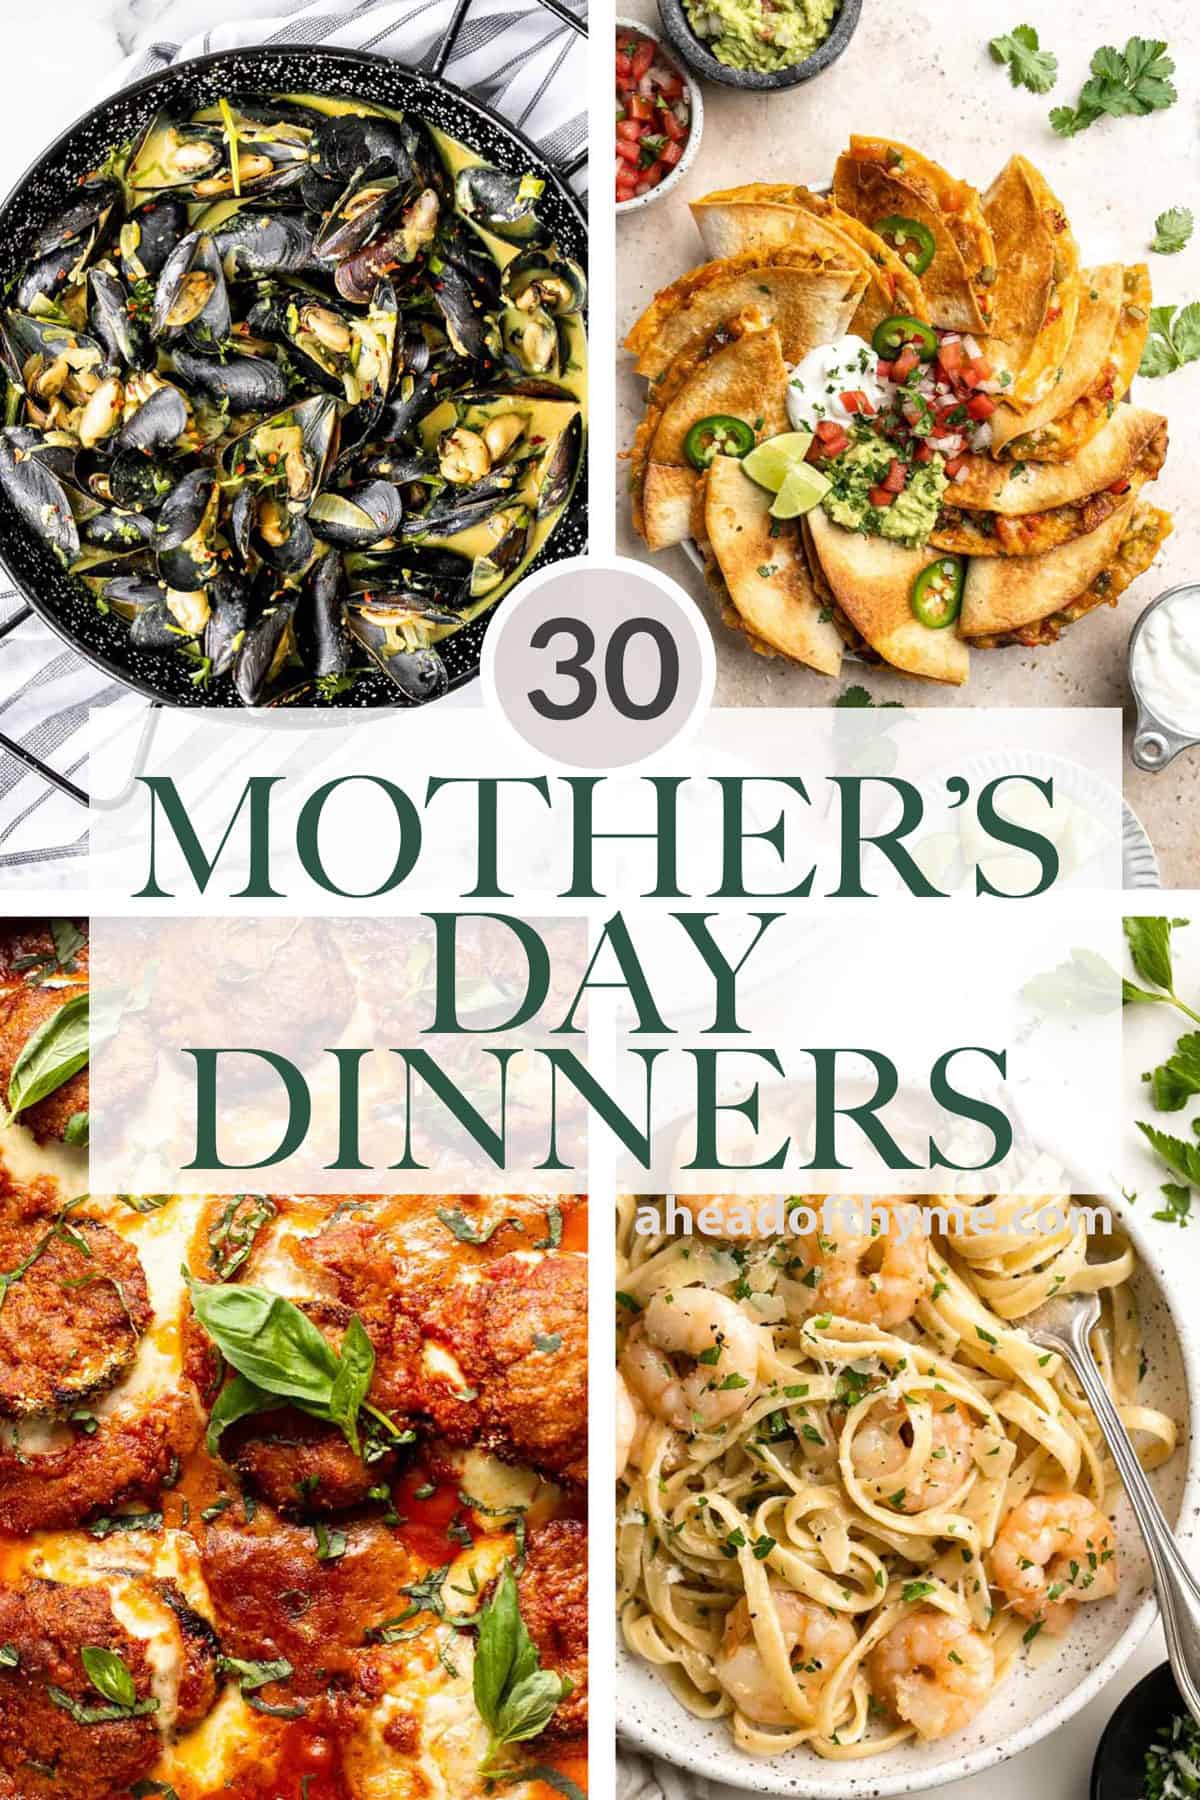 Over 30 Mother's Day Dinner Ideas including classic comfort foods, fancy dishes like scallops and lamb chops, vegetarian and vegan dinner recipes, and more! | aheadofthyme.com